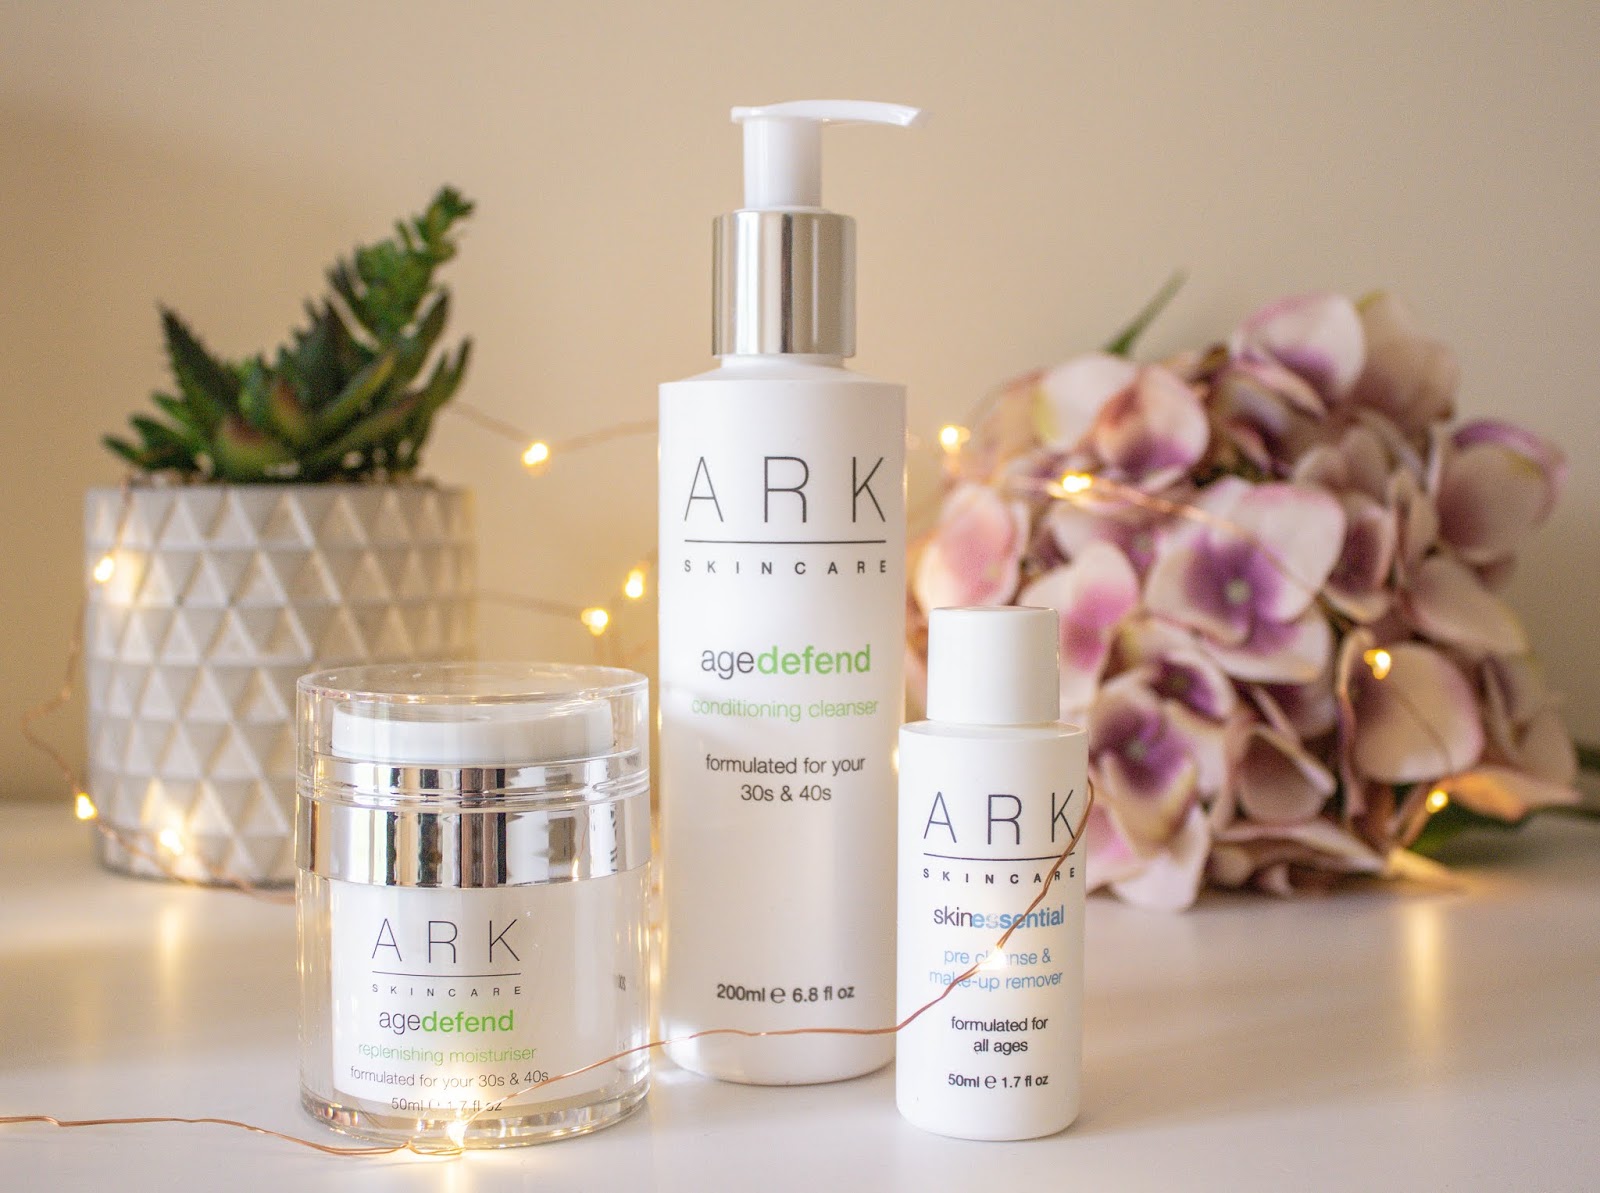 Ark Skincare: The Brand Promoting Beautiful Skin At Any Age, Vegan And Cruelty Free